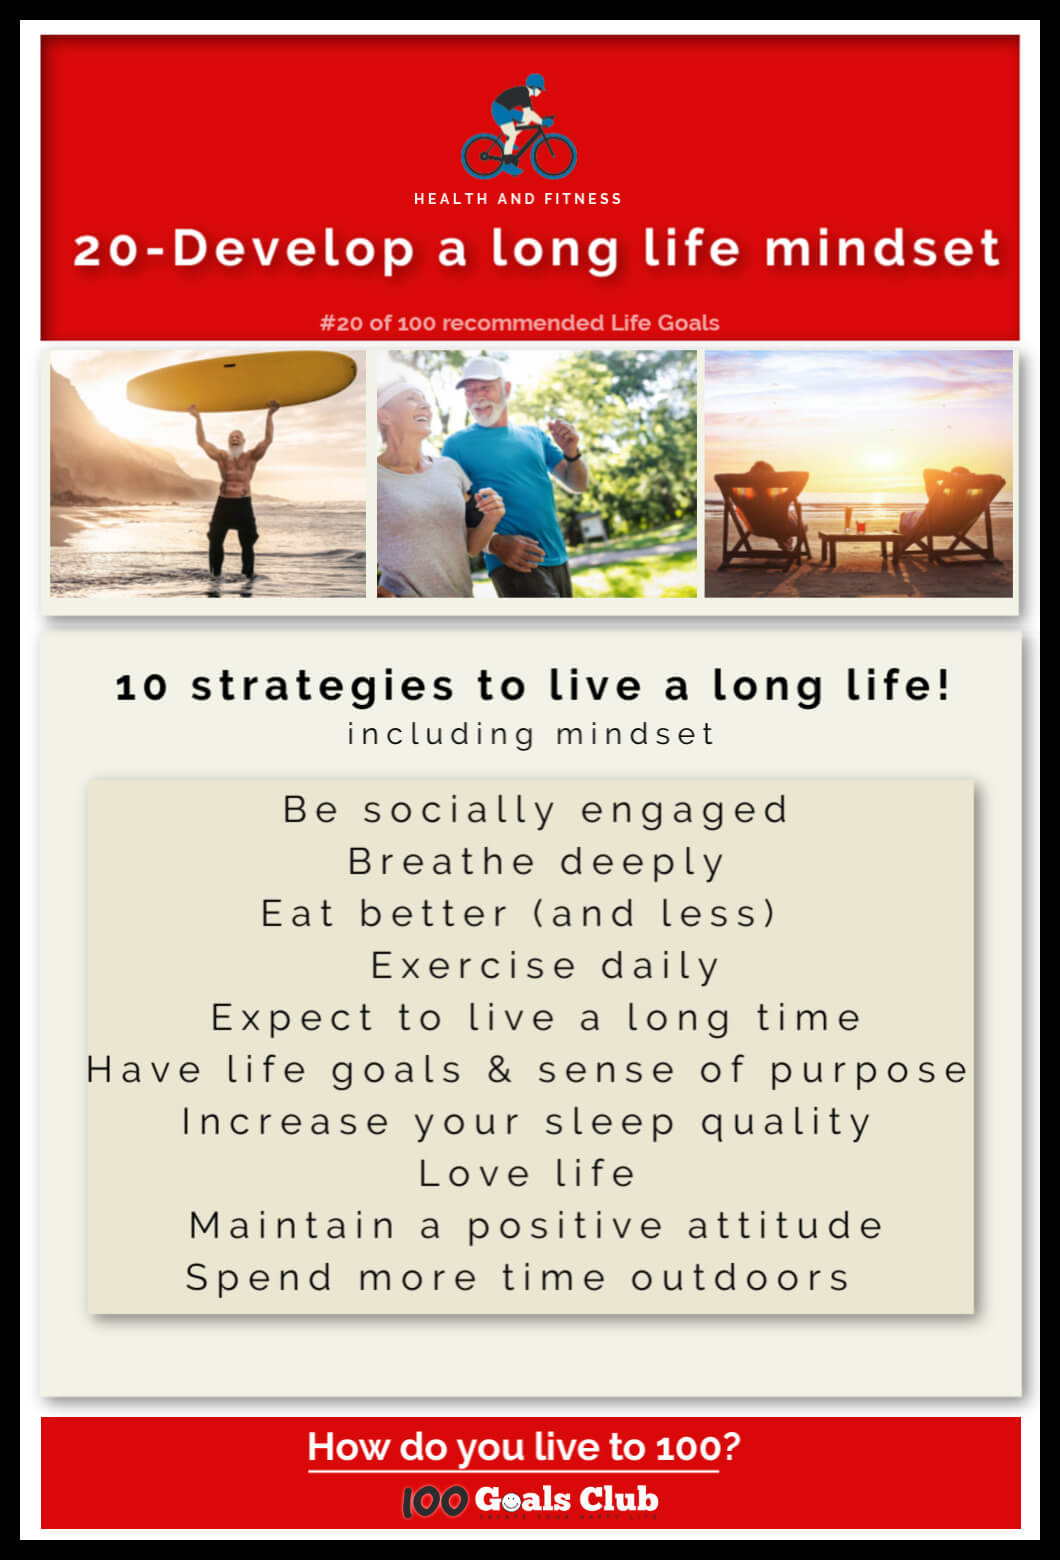 Why not set a goal on how to live to 100 to live a long and healthy life?  Why not plan to live a long life? There are so many wonderful things to do, be, have, and experience in your life, and the setting of your 100 Life Goals is just the beginning. 